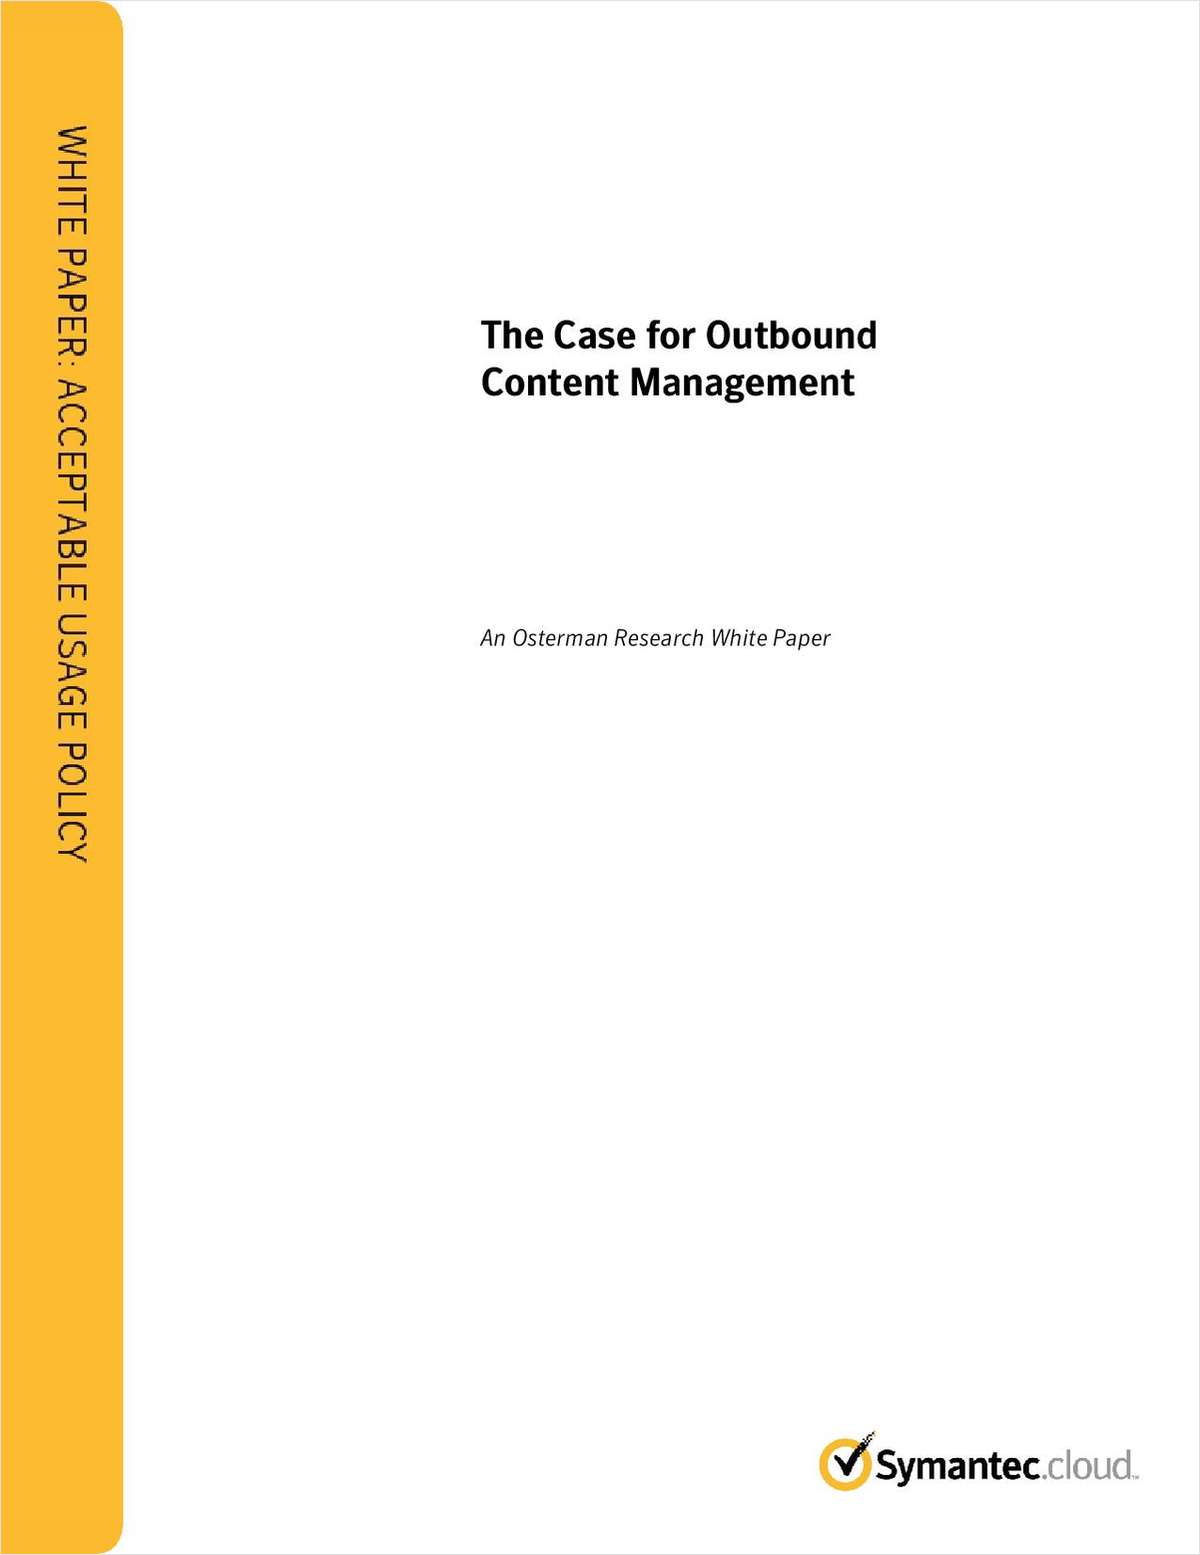 The Case for Outbound Content Management